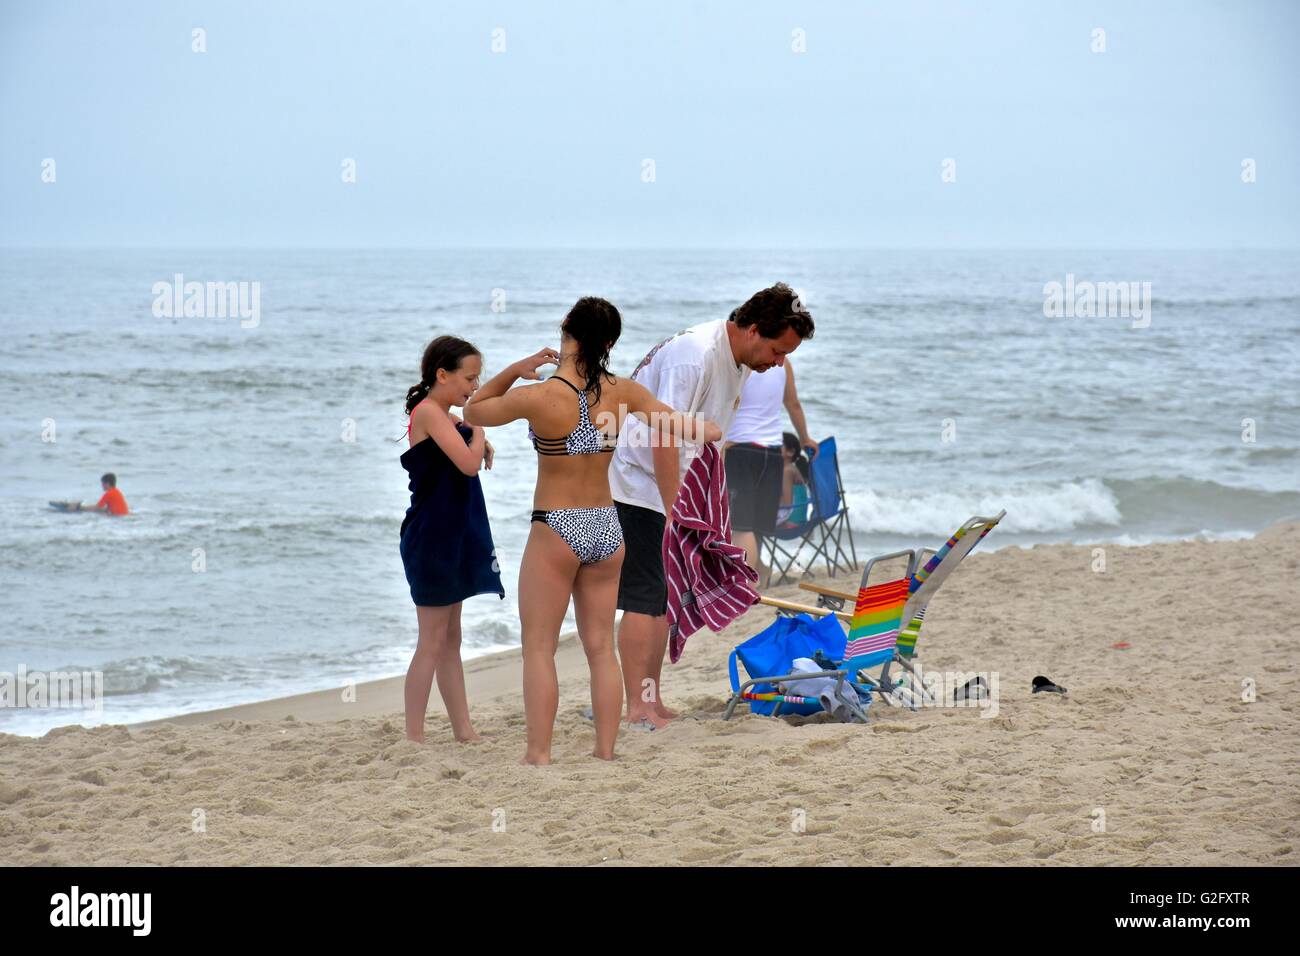 People enjoying a relaxing day on the beach with friends and family Stock Photo